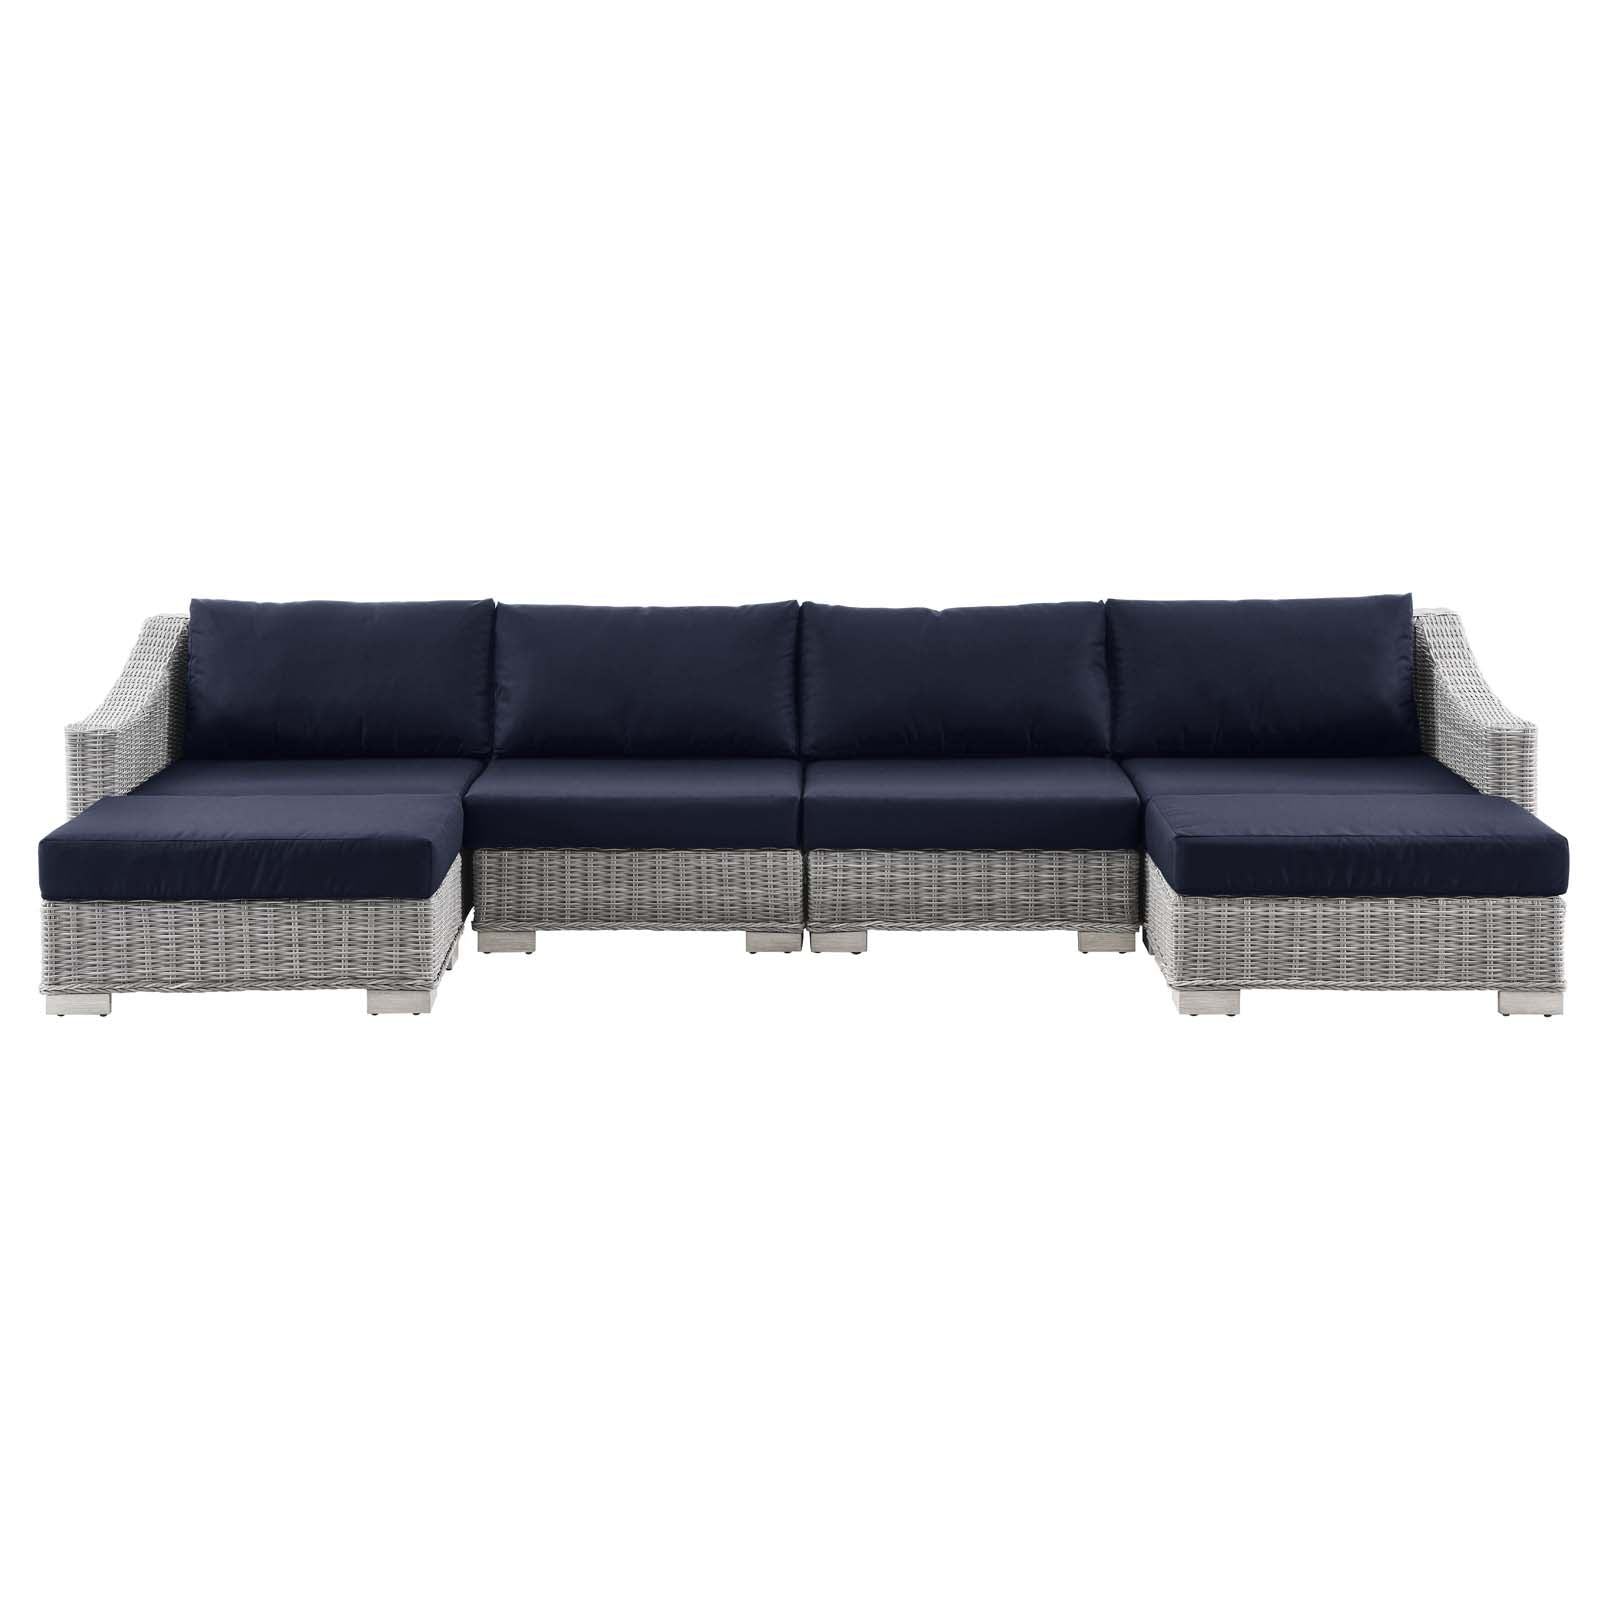 Modway - Conway Outdoor Patio Wicker Rattan 6-Piece Sectional Sofa Furniture Set - EEI-5099